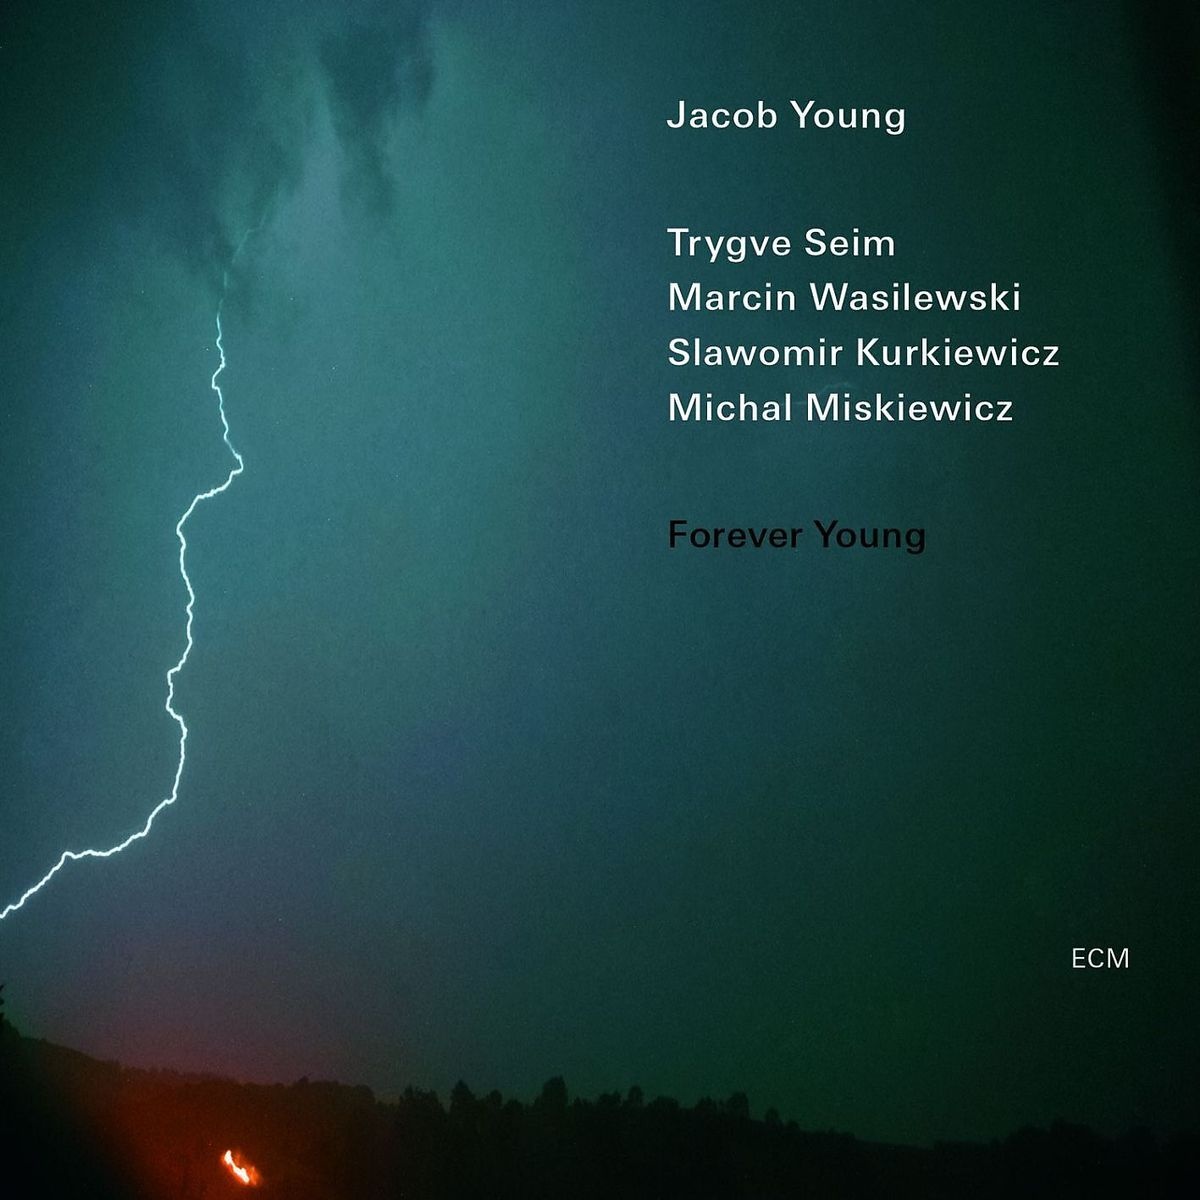 Forever Young - Jacob Young. (CD)